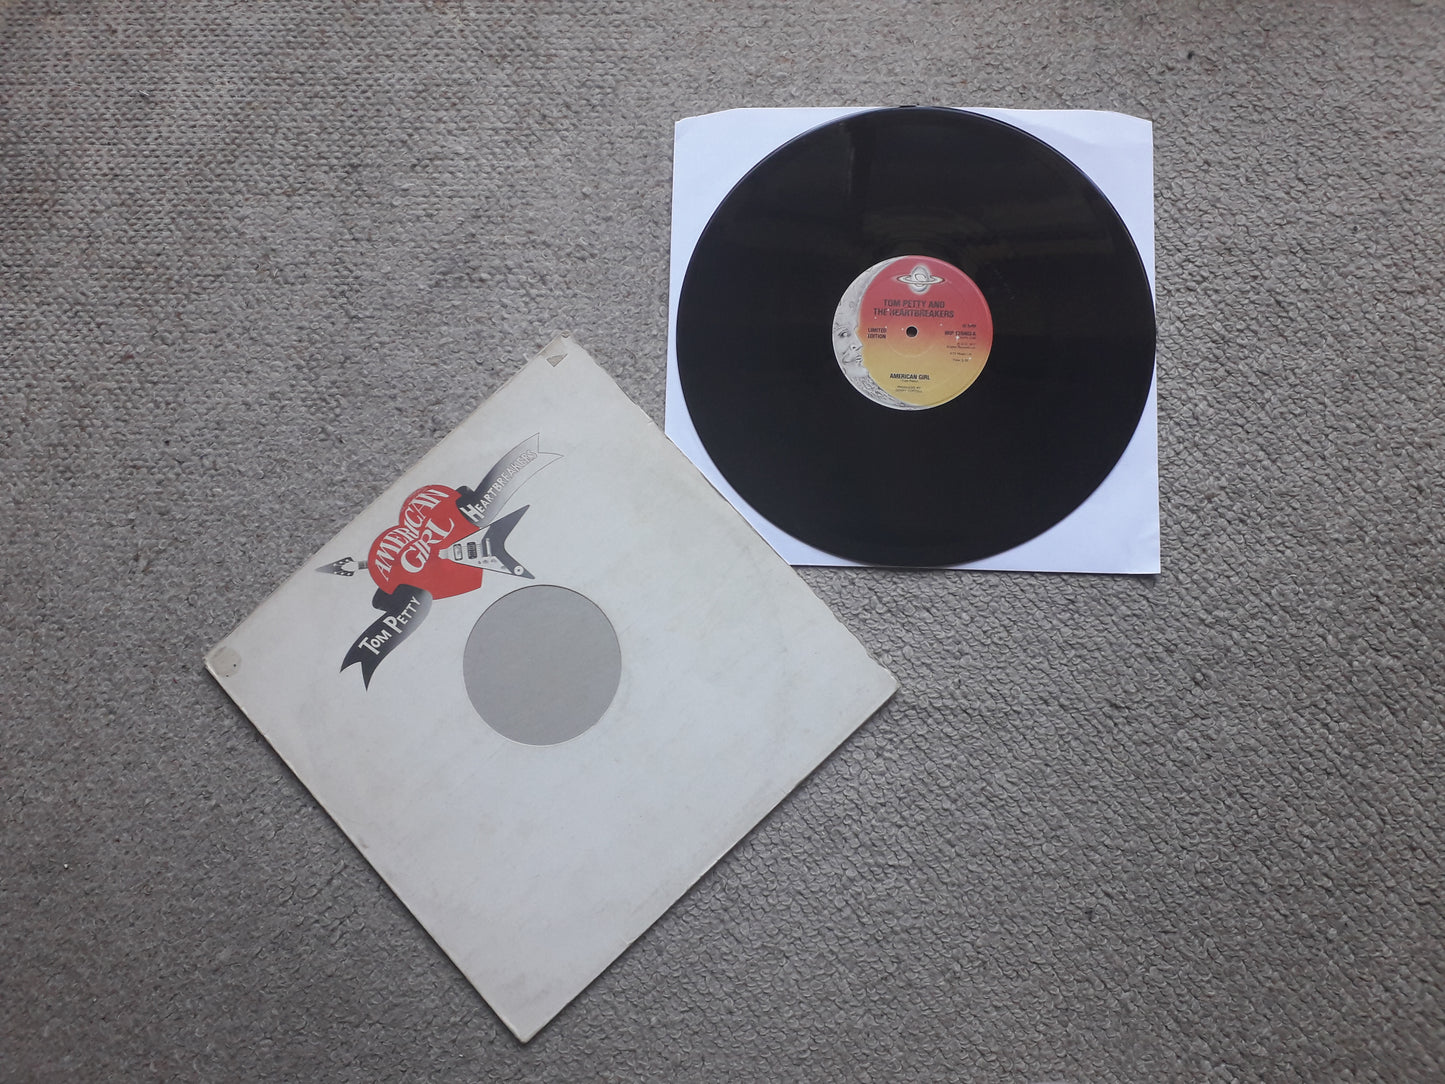 Tom Petty & The Heartbreakers-American Girl 12" Limited Edition (WIP 12/6403)